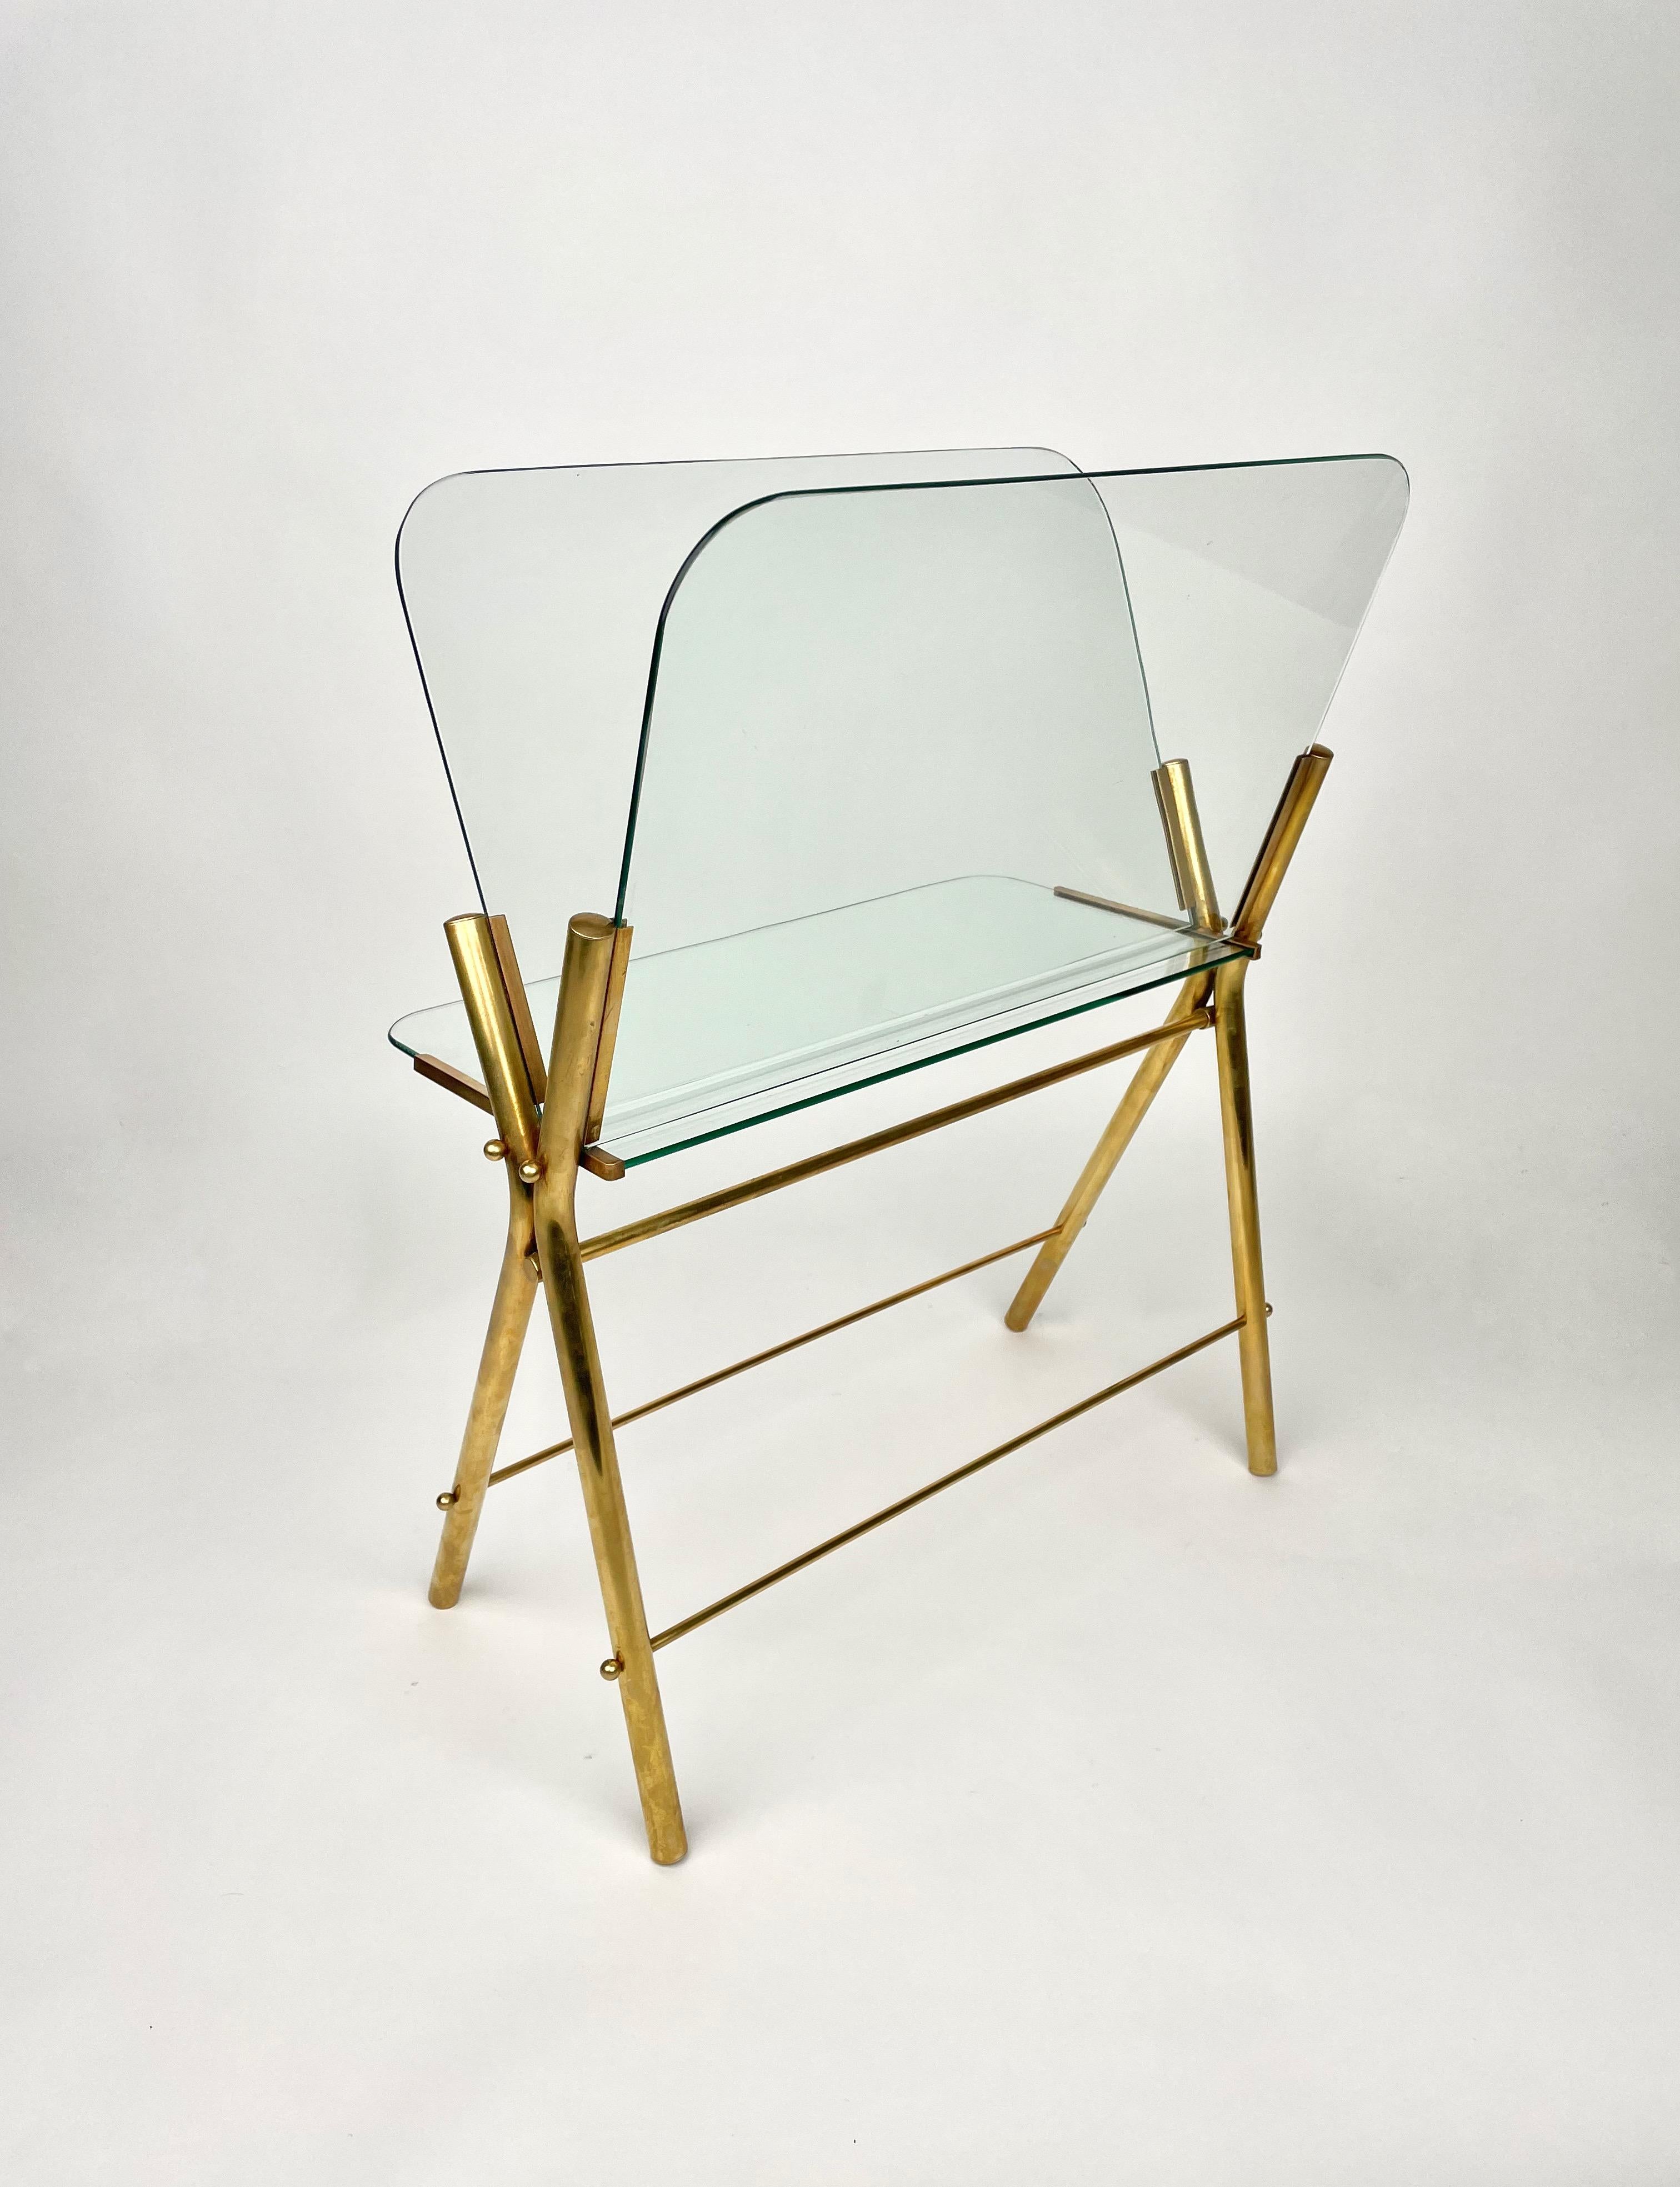 Magazine Rack Table Brass and Glass, Italy 1950s For Sale 2